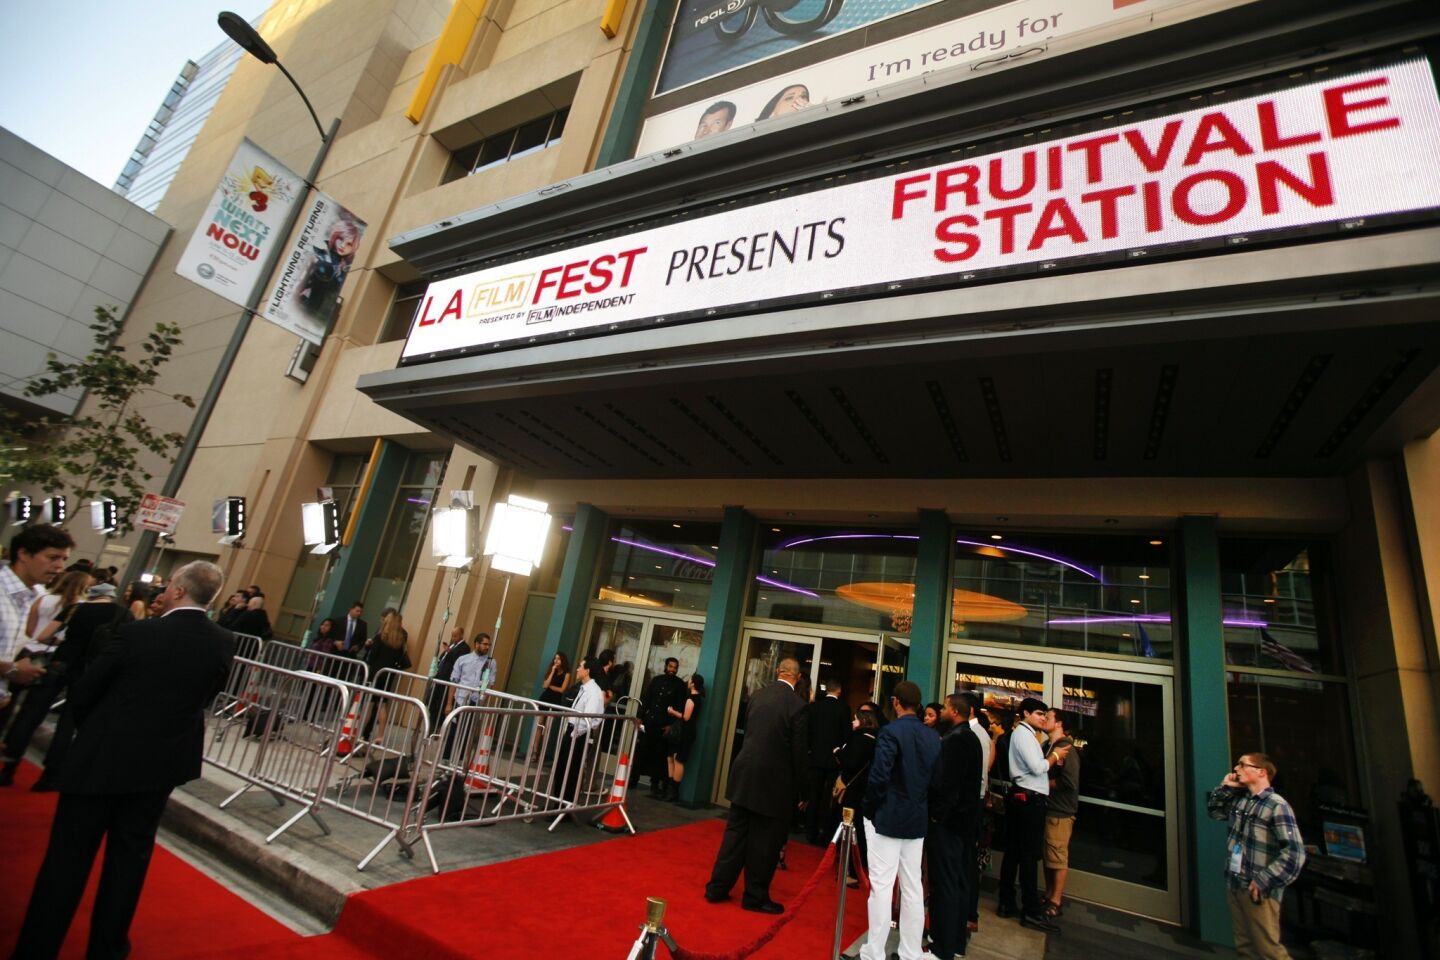 The cast walks the red carpet at the screening of "Fruitvale Station" at the Los Angeles Film Festival on June 17, 2013.